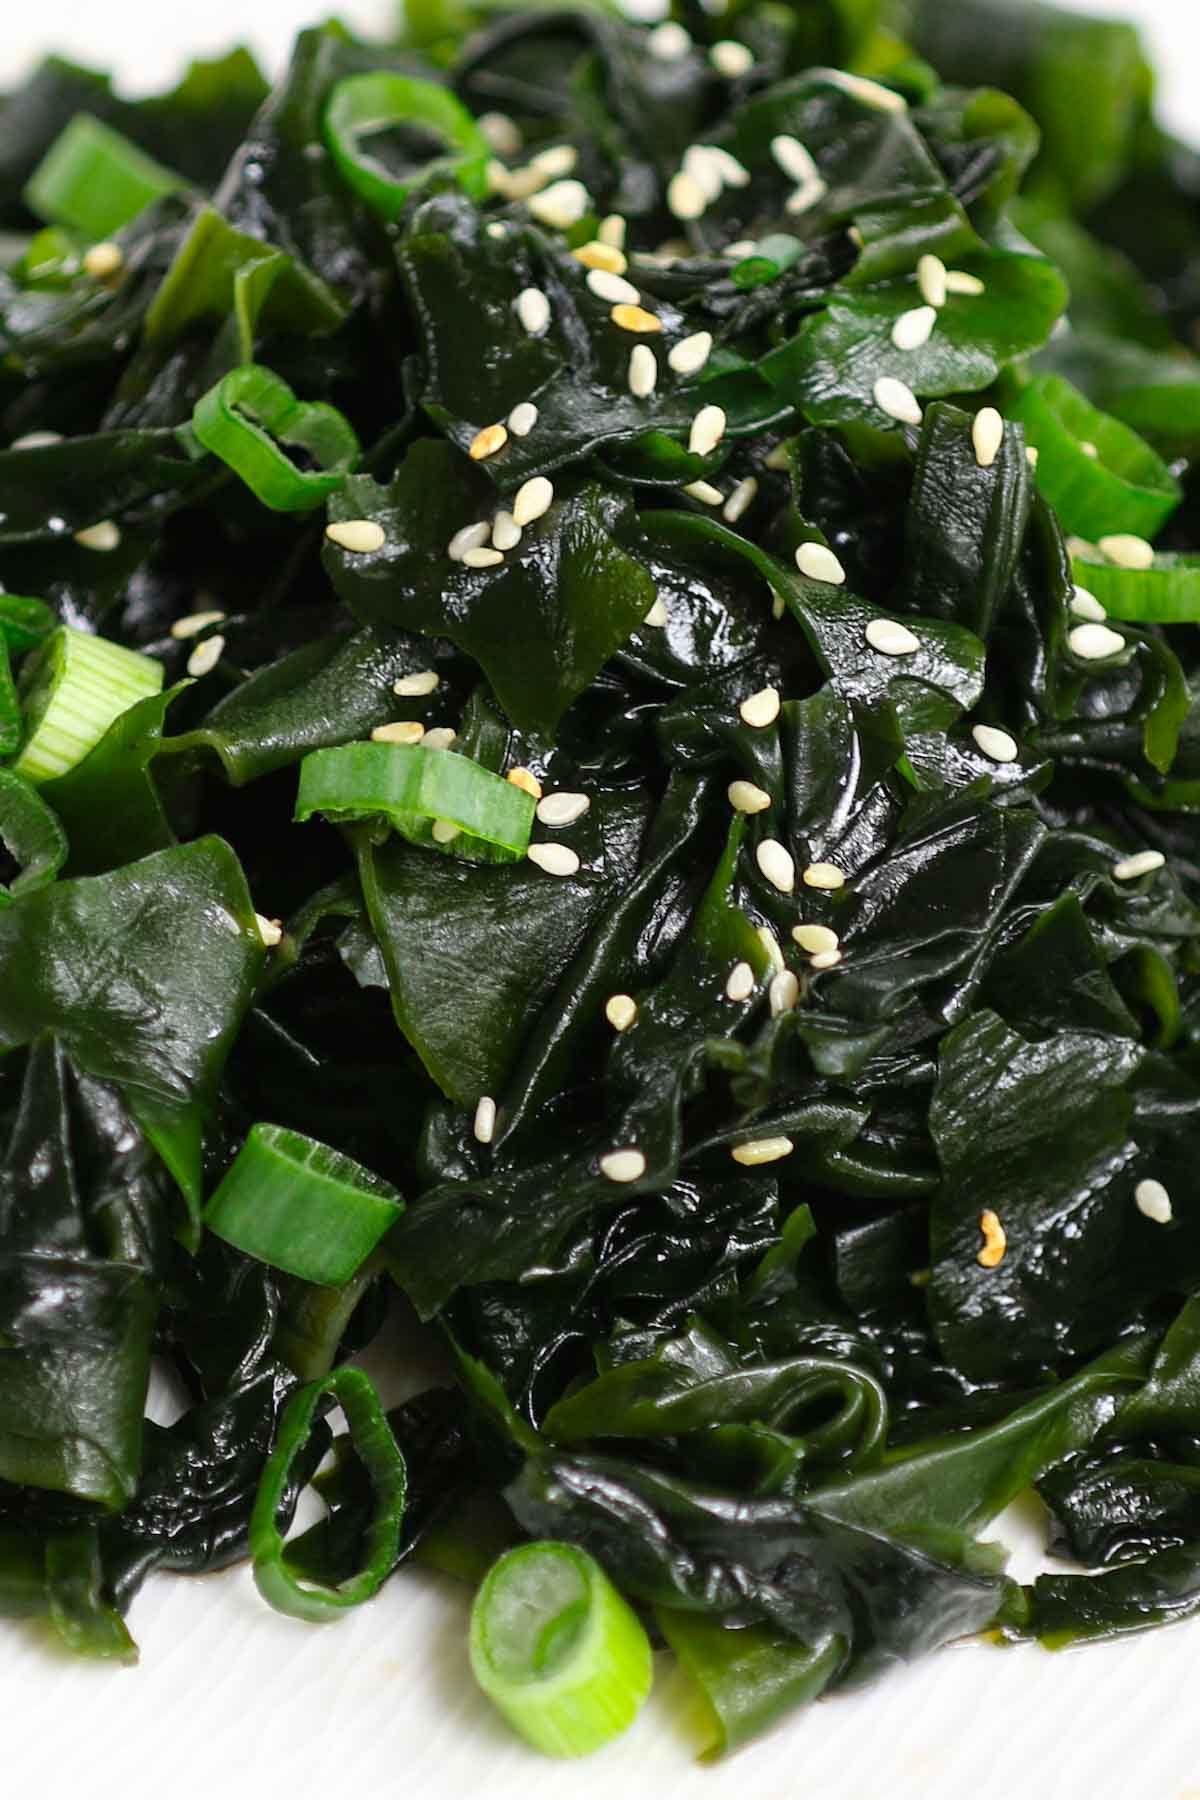 This healthy Seaweed Salad is refreshing, delicious, and super easy to prepare. Made of dried wakame, sesame seeds, and a simple dressing, this Japanese salad recipe is made from scratch and loaded with great nutrients. Serve with cherry tomatoes and green leafy vegetables for a low-carb lunch or dinner!